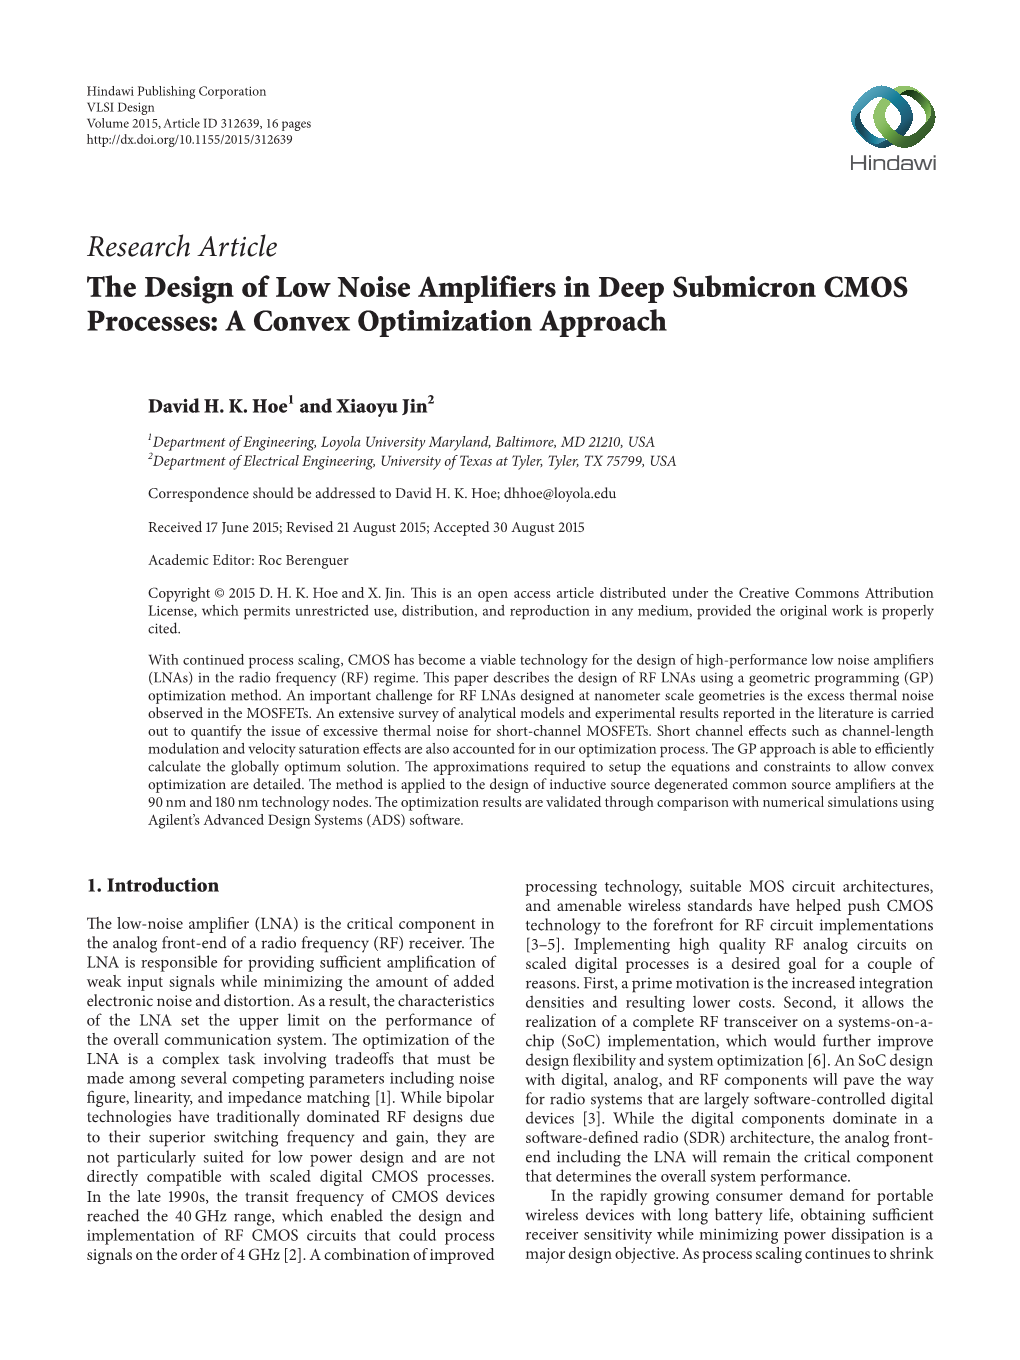 The Design of Low Noise Amplifiers in Deep Submicron CMOS Processes: a Convex Optimization Approach